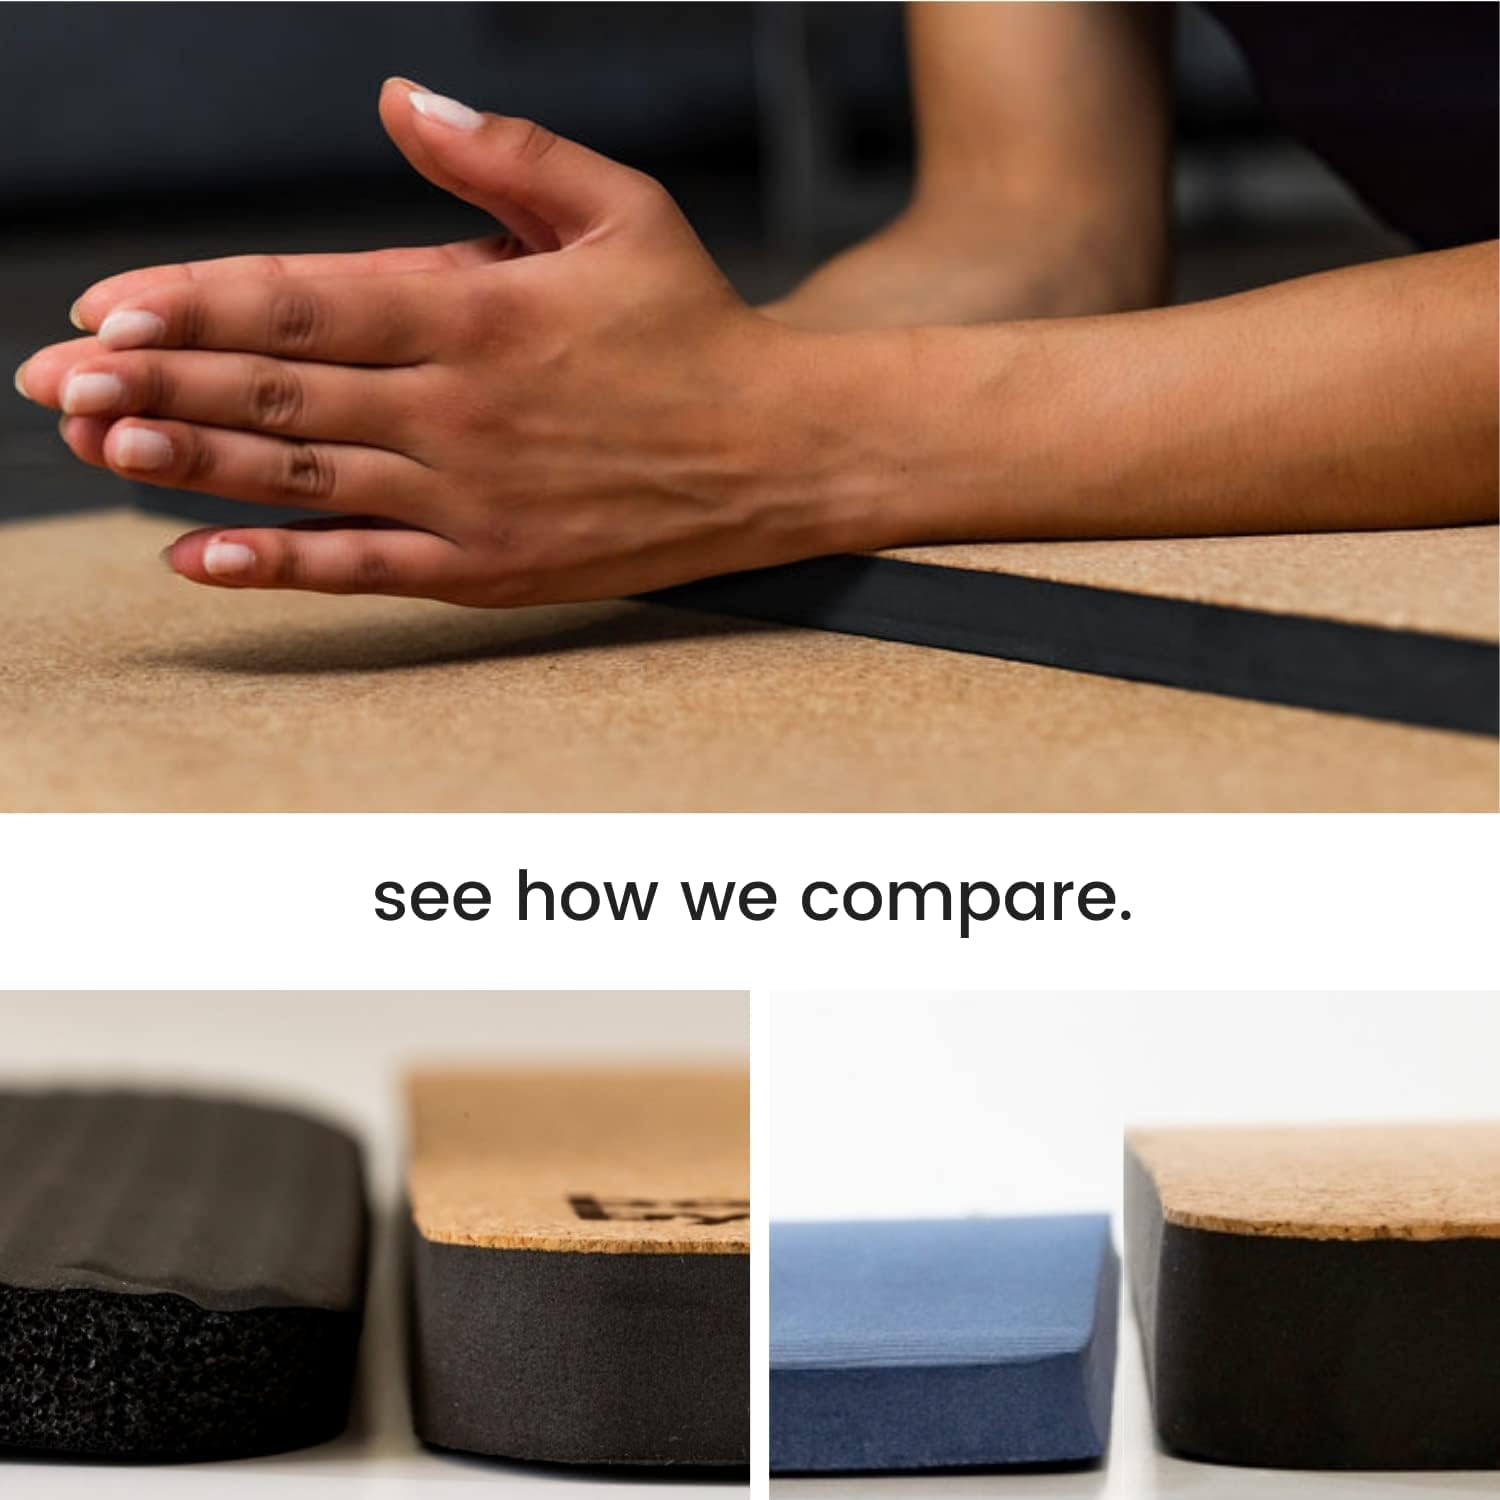 Body By Yoga Performance Knee Pad Cushion: The Ultimate Solution for Yoga Enthusiasts